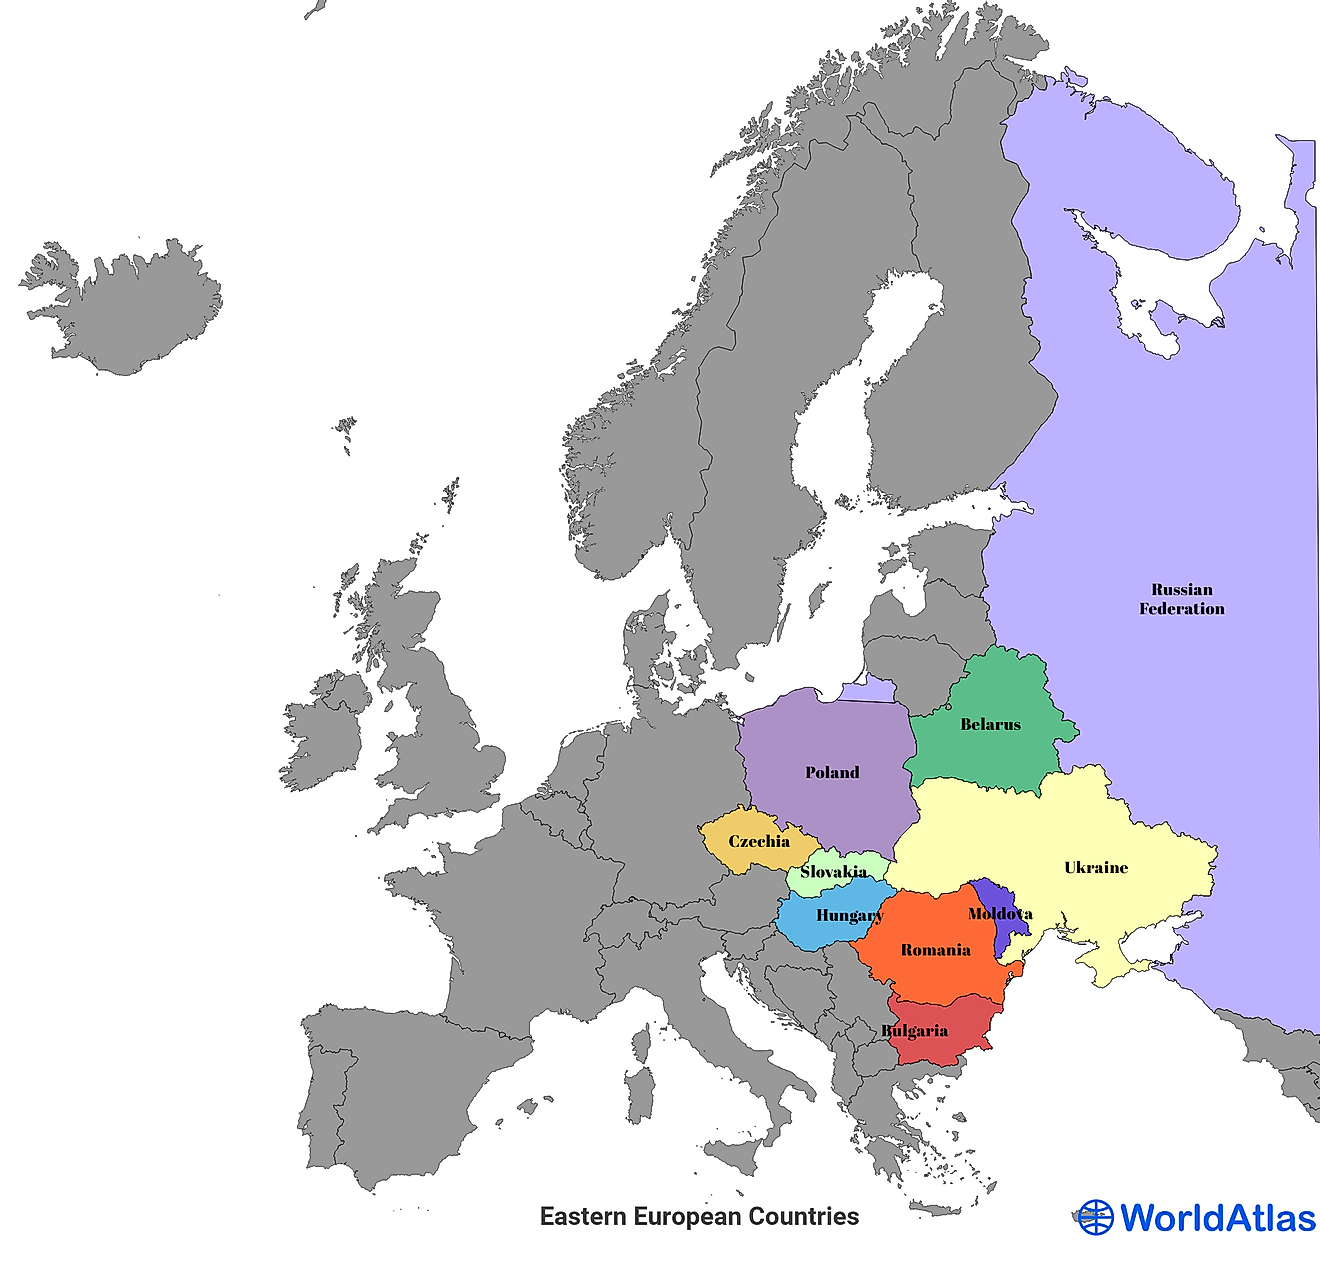 Map of Europe showing the Eastern European Countries.